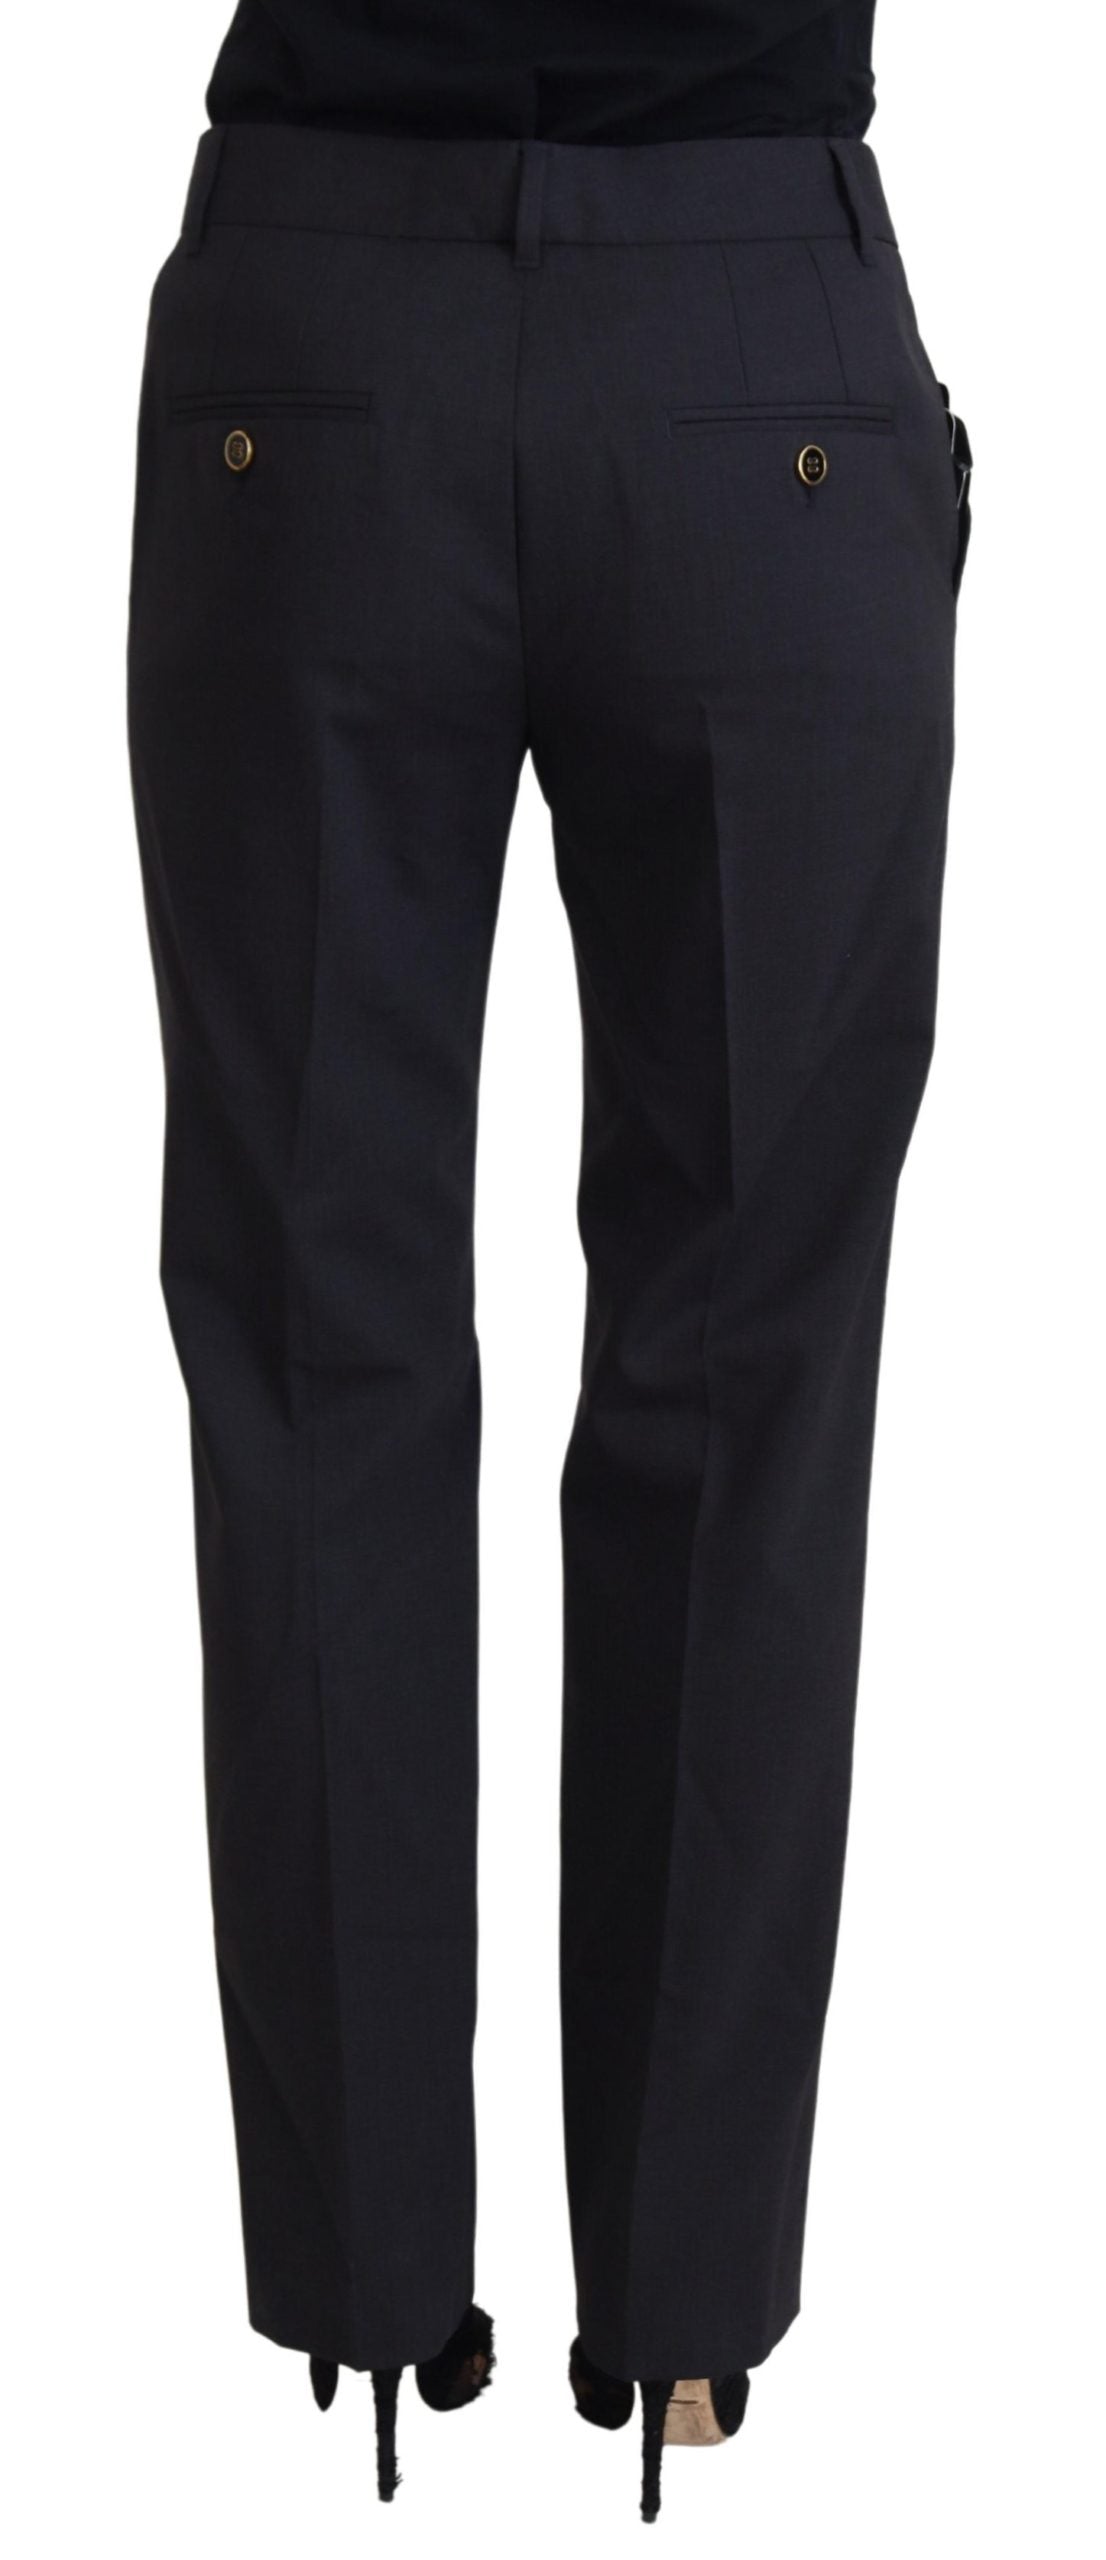 Dolce & Gabbana Chic Grey Wool Blend Pants for Elevated Style